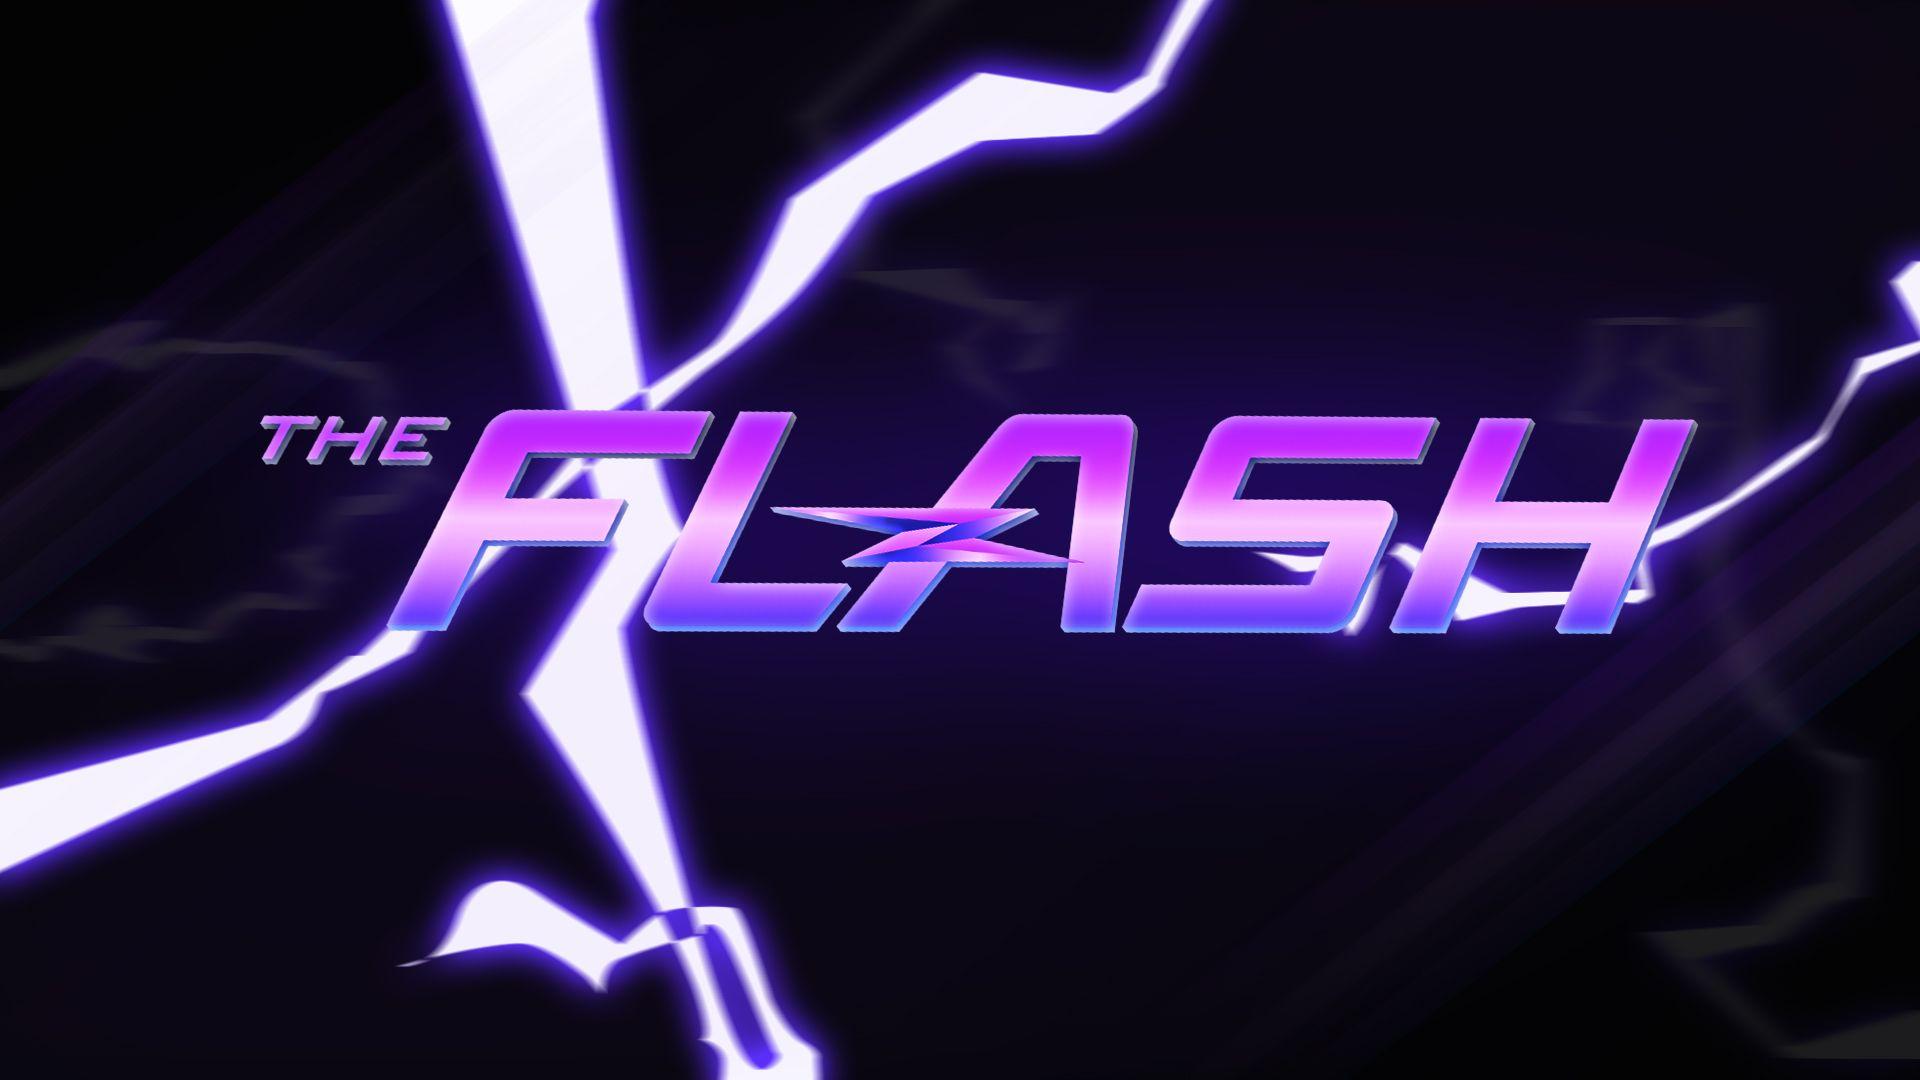 Blue Flash Logo - CW's The Flash Logo Desktop Wallpaper - Blue (from the show intro ...